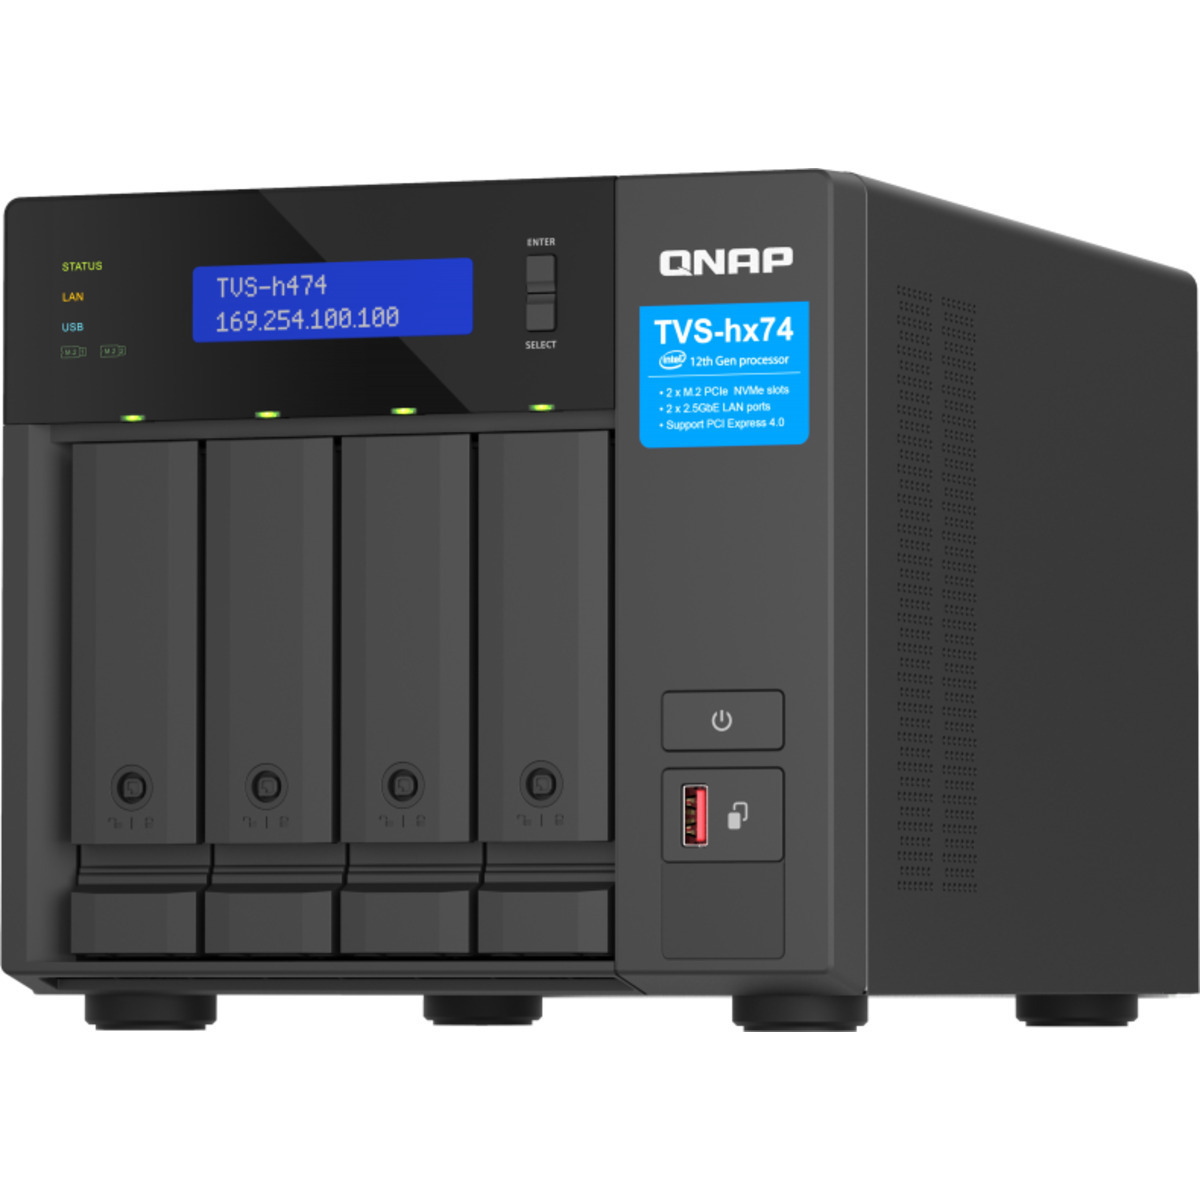 buy $2029 QNAP TVS-h474 Pentium Gold 8tb Desktop NAS - Network Attached Storage Device 4x2000gb Seagate IronWolf Pro ST2000NT001 3.5 7200rpm SATA 6Gb/s HDD NAS Class Drives Installed - Burn-In Tested - FREE RAM UPGRADE - nas headquarters buy network attached storage server device das new raid-5 free shipping simply usa TVS-h474 Pentium Gold